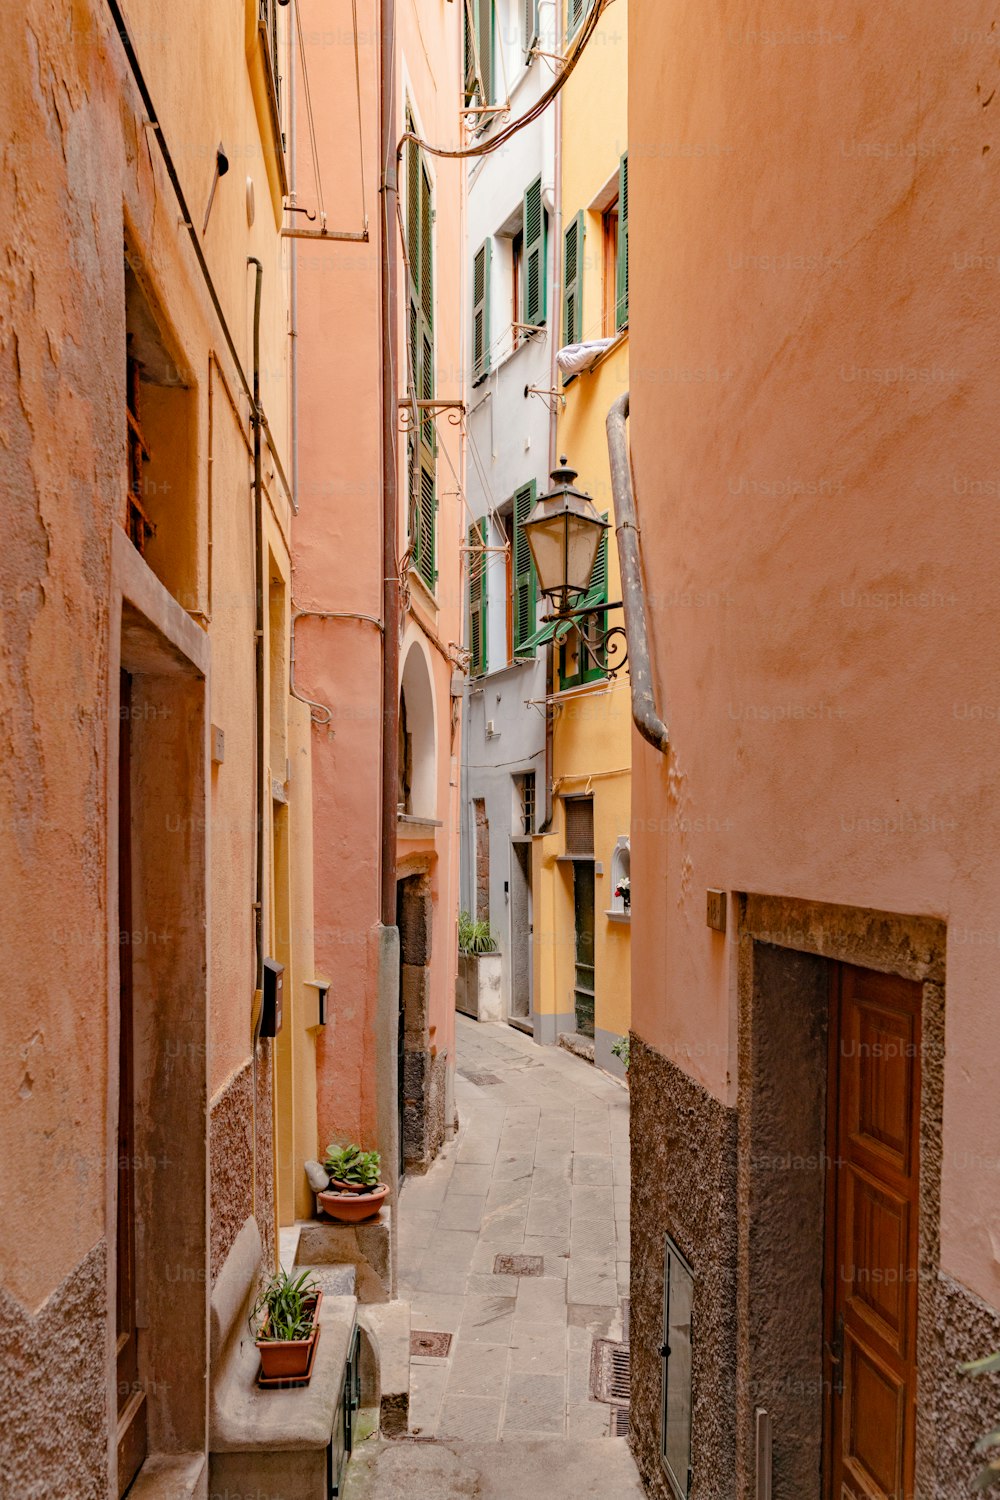 a narrow alley way with buildings and a potted plant